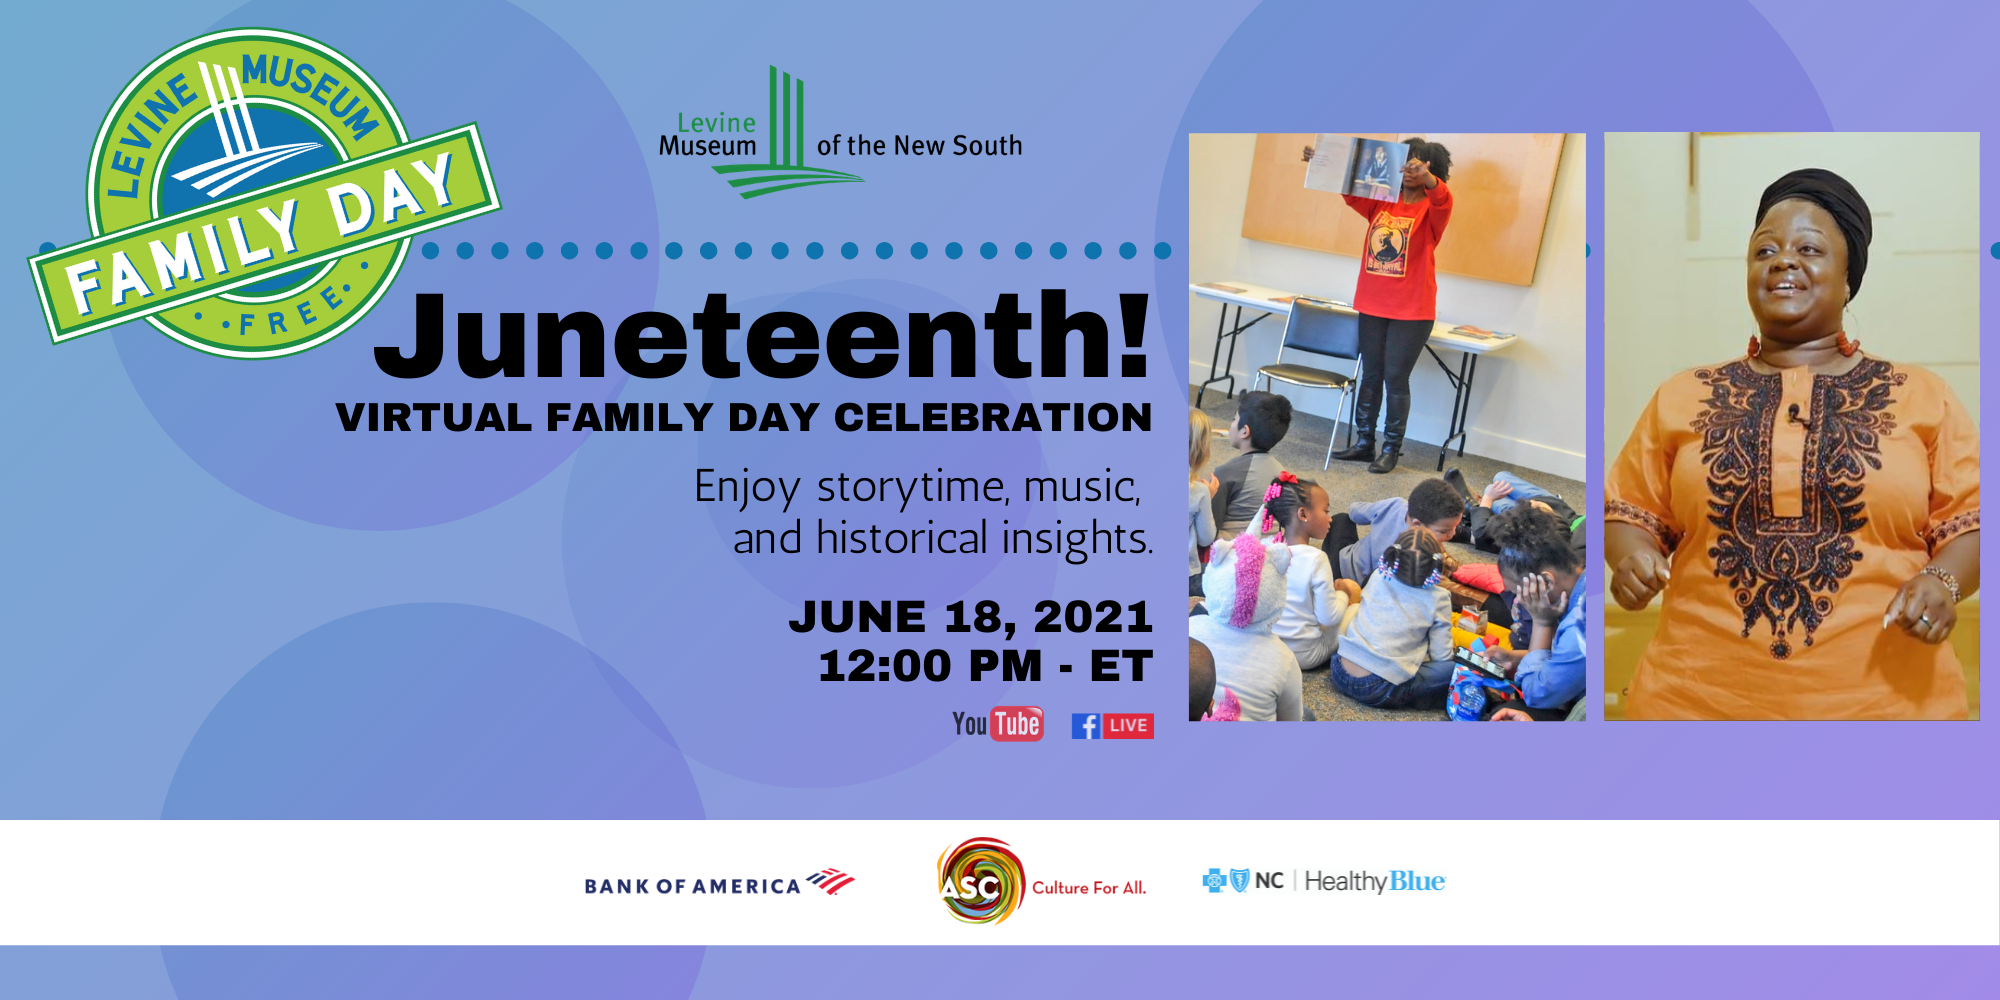 Levine Museum of the New South Juneteenth Family Day Storytime Event Image